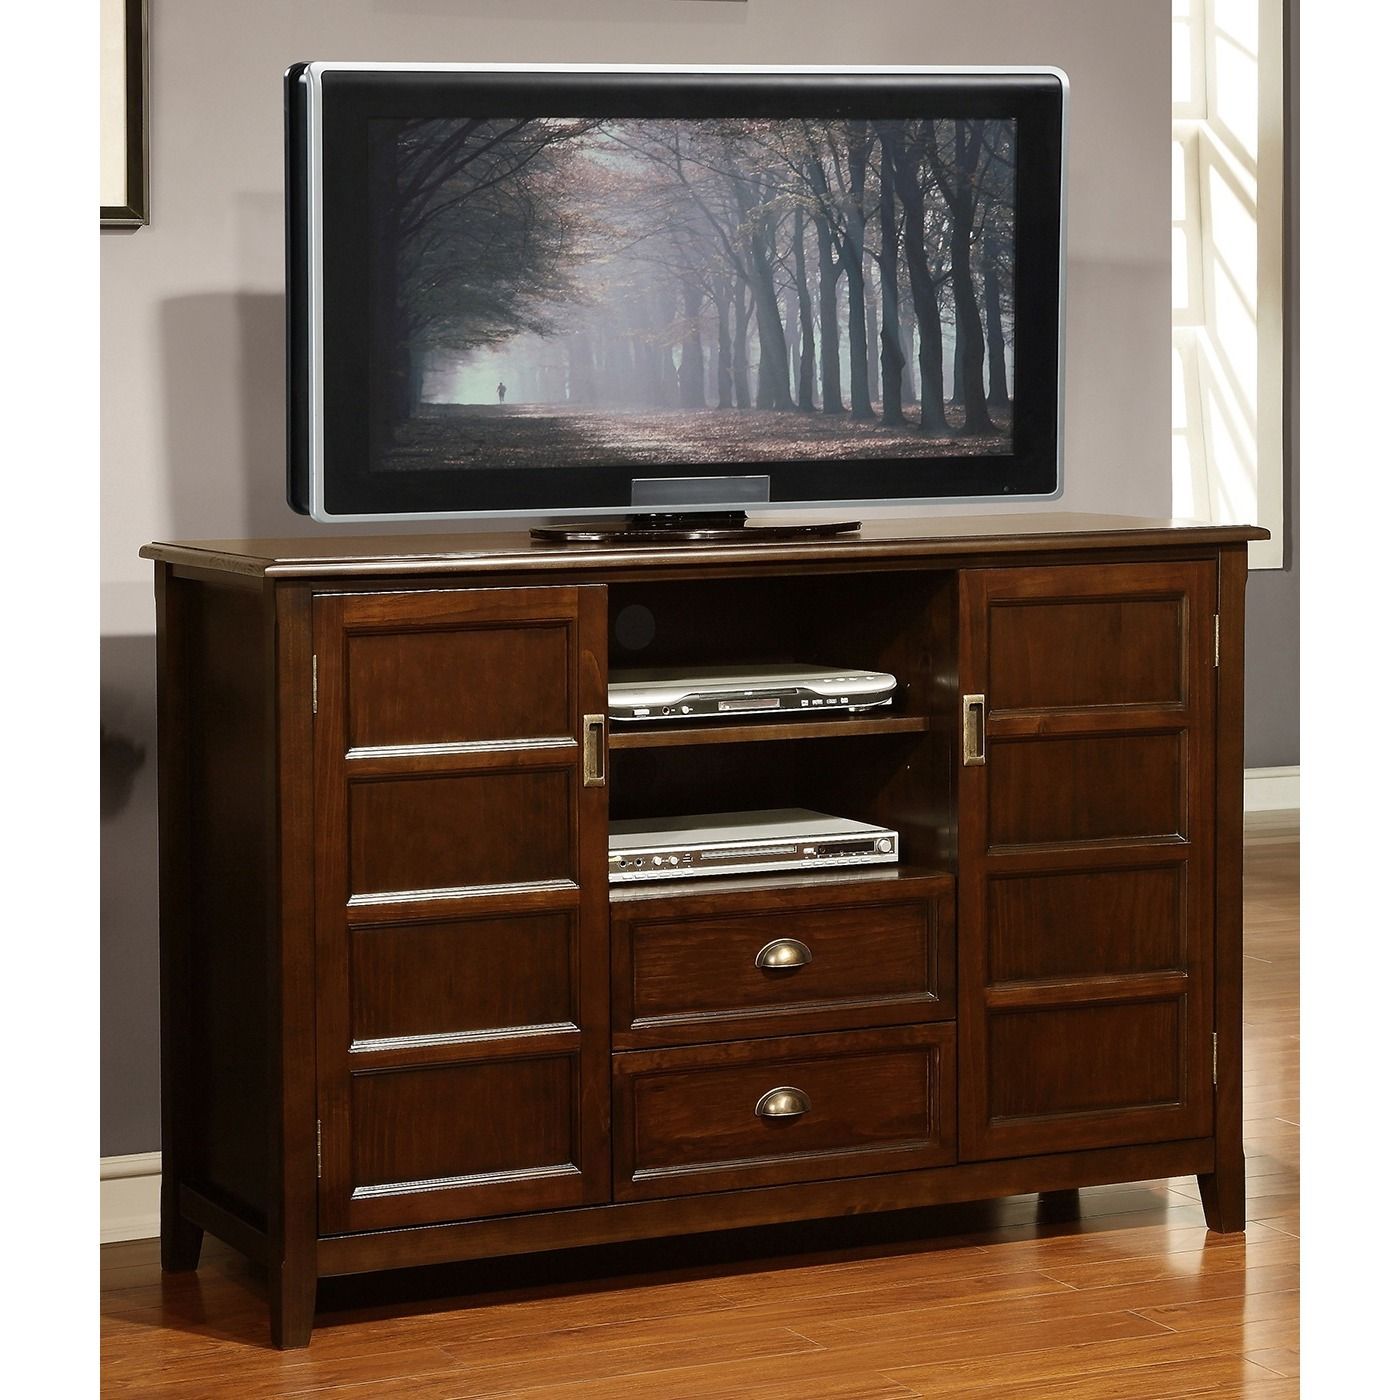 Our Best Living Room Furniture Deals | Blue Tv Stand, Tall Regarding Wide Entertainment Centers (View 8 of 20)